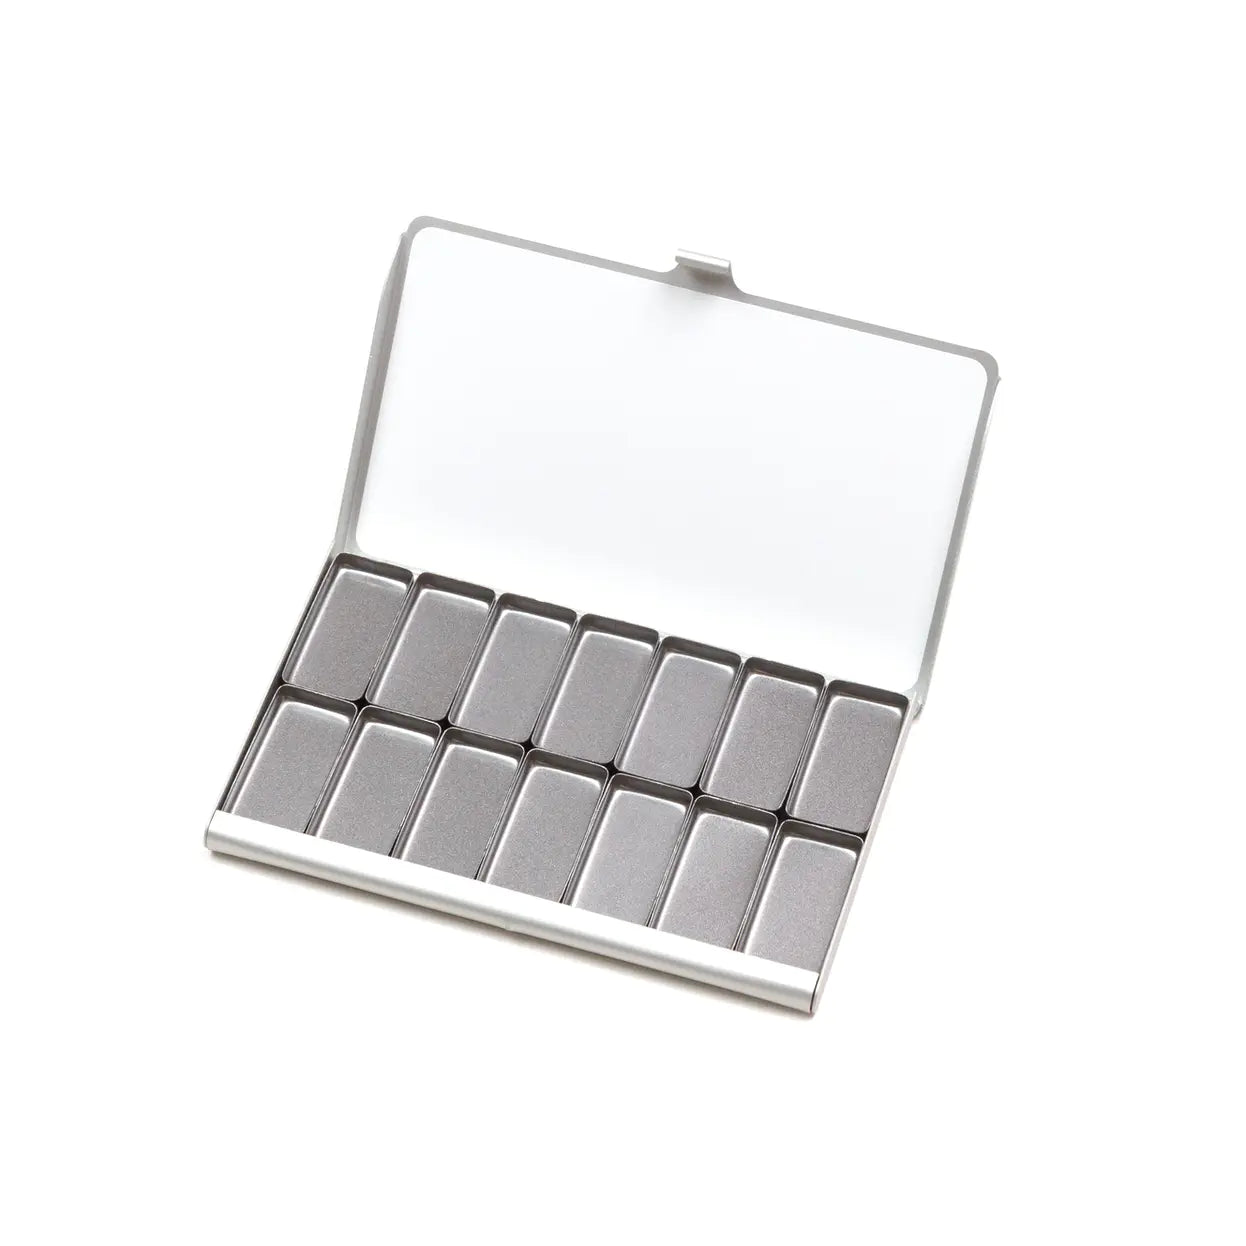 Art Toolkit Pocket Palette with 14 Standard Pans